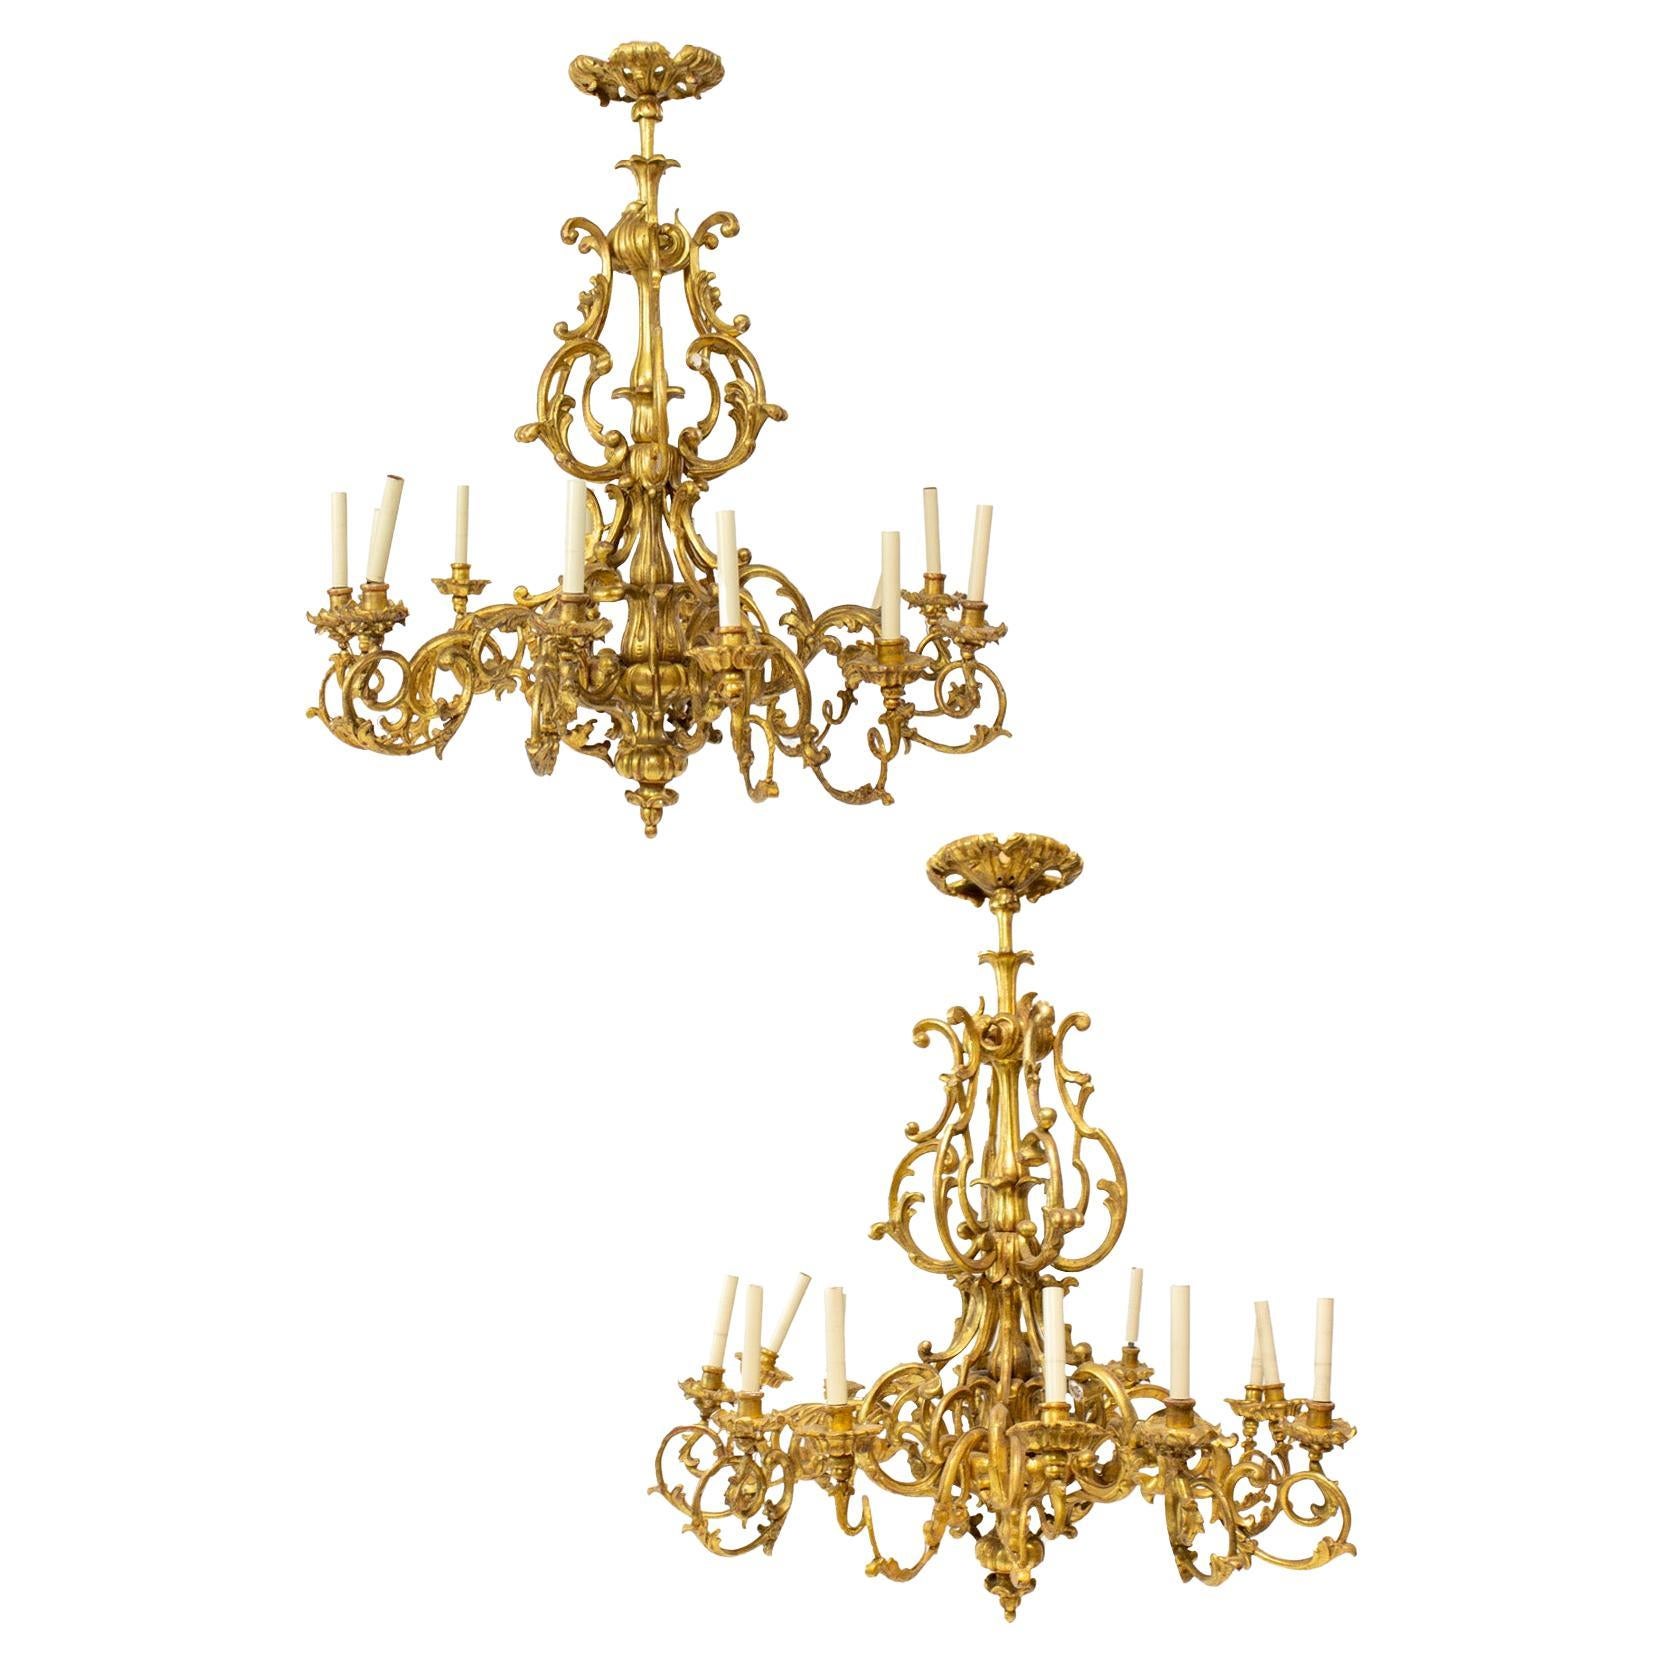 19th Century Rococo French Giltwood Chandeliers, a Pair